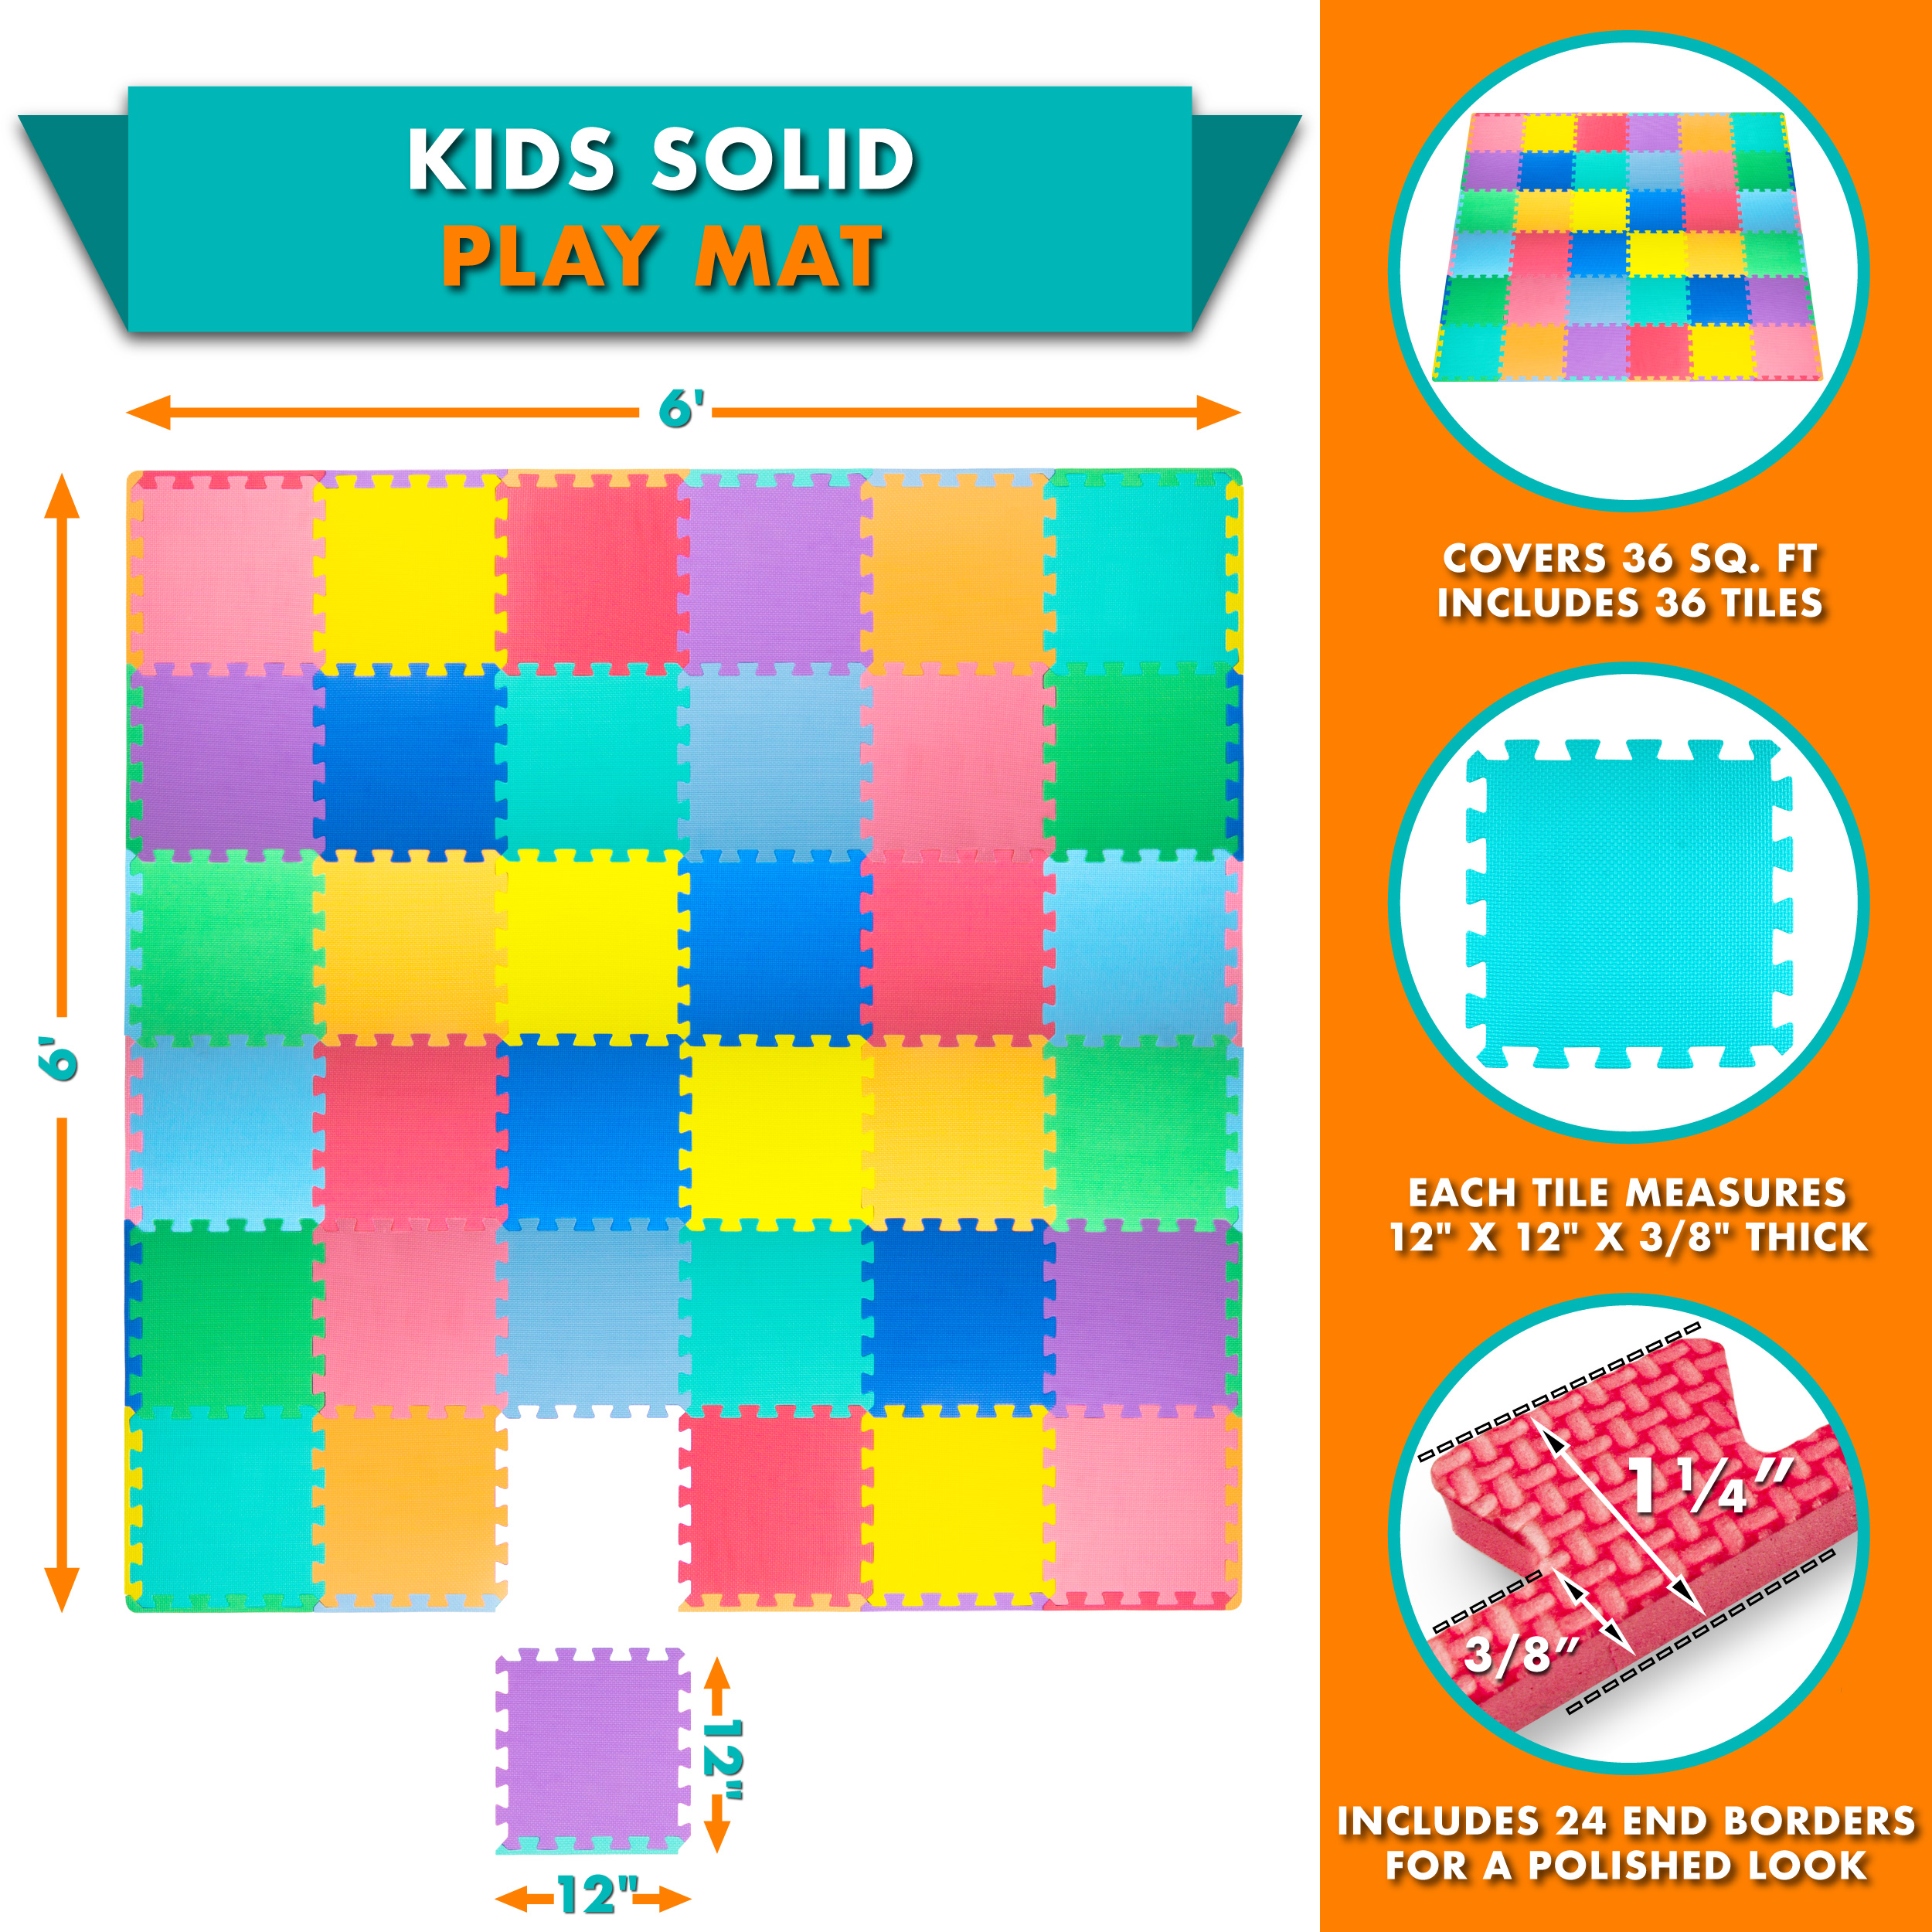 ProSource Kids Solid Colors Foam Puzzle Floor Play Mat, 36 or 16 tiles - image 2 of 6